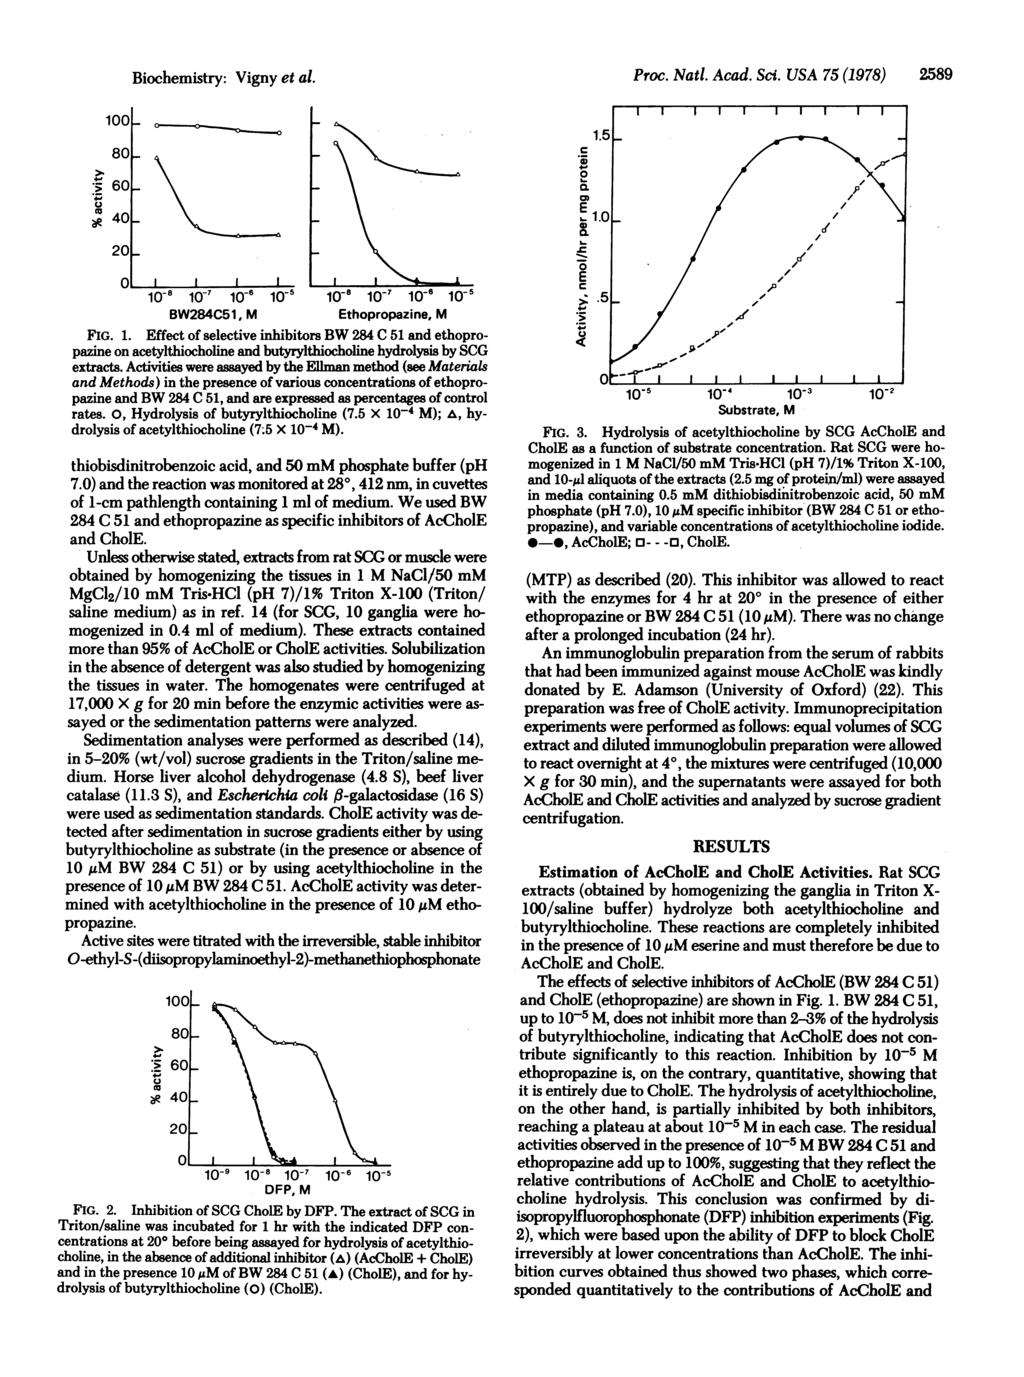 - Biochemistry: Vigny et al. 100[. 801 r._ 60V 08 U 40L 20 Ao fr 10-i 10-7 10-6 10-5 -8 10-7 106 10-5 BW284C51, M thopropazine, M FG. 1. ffect of selective inhibitors BW 284 C 51 and ethopropazine on acetylthiocholine and butyrylthiocholine hydrolysis by SCG extracts.